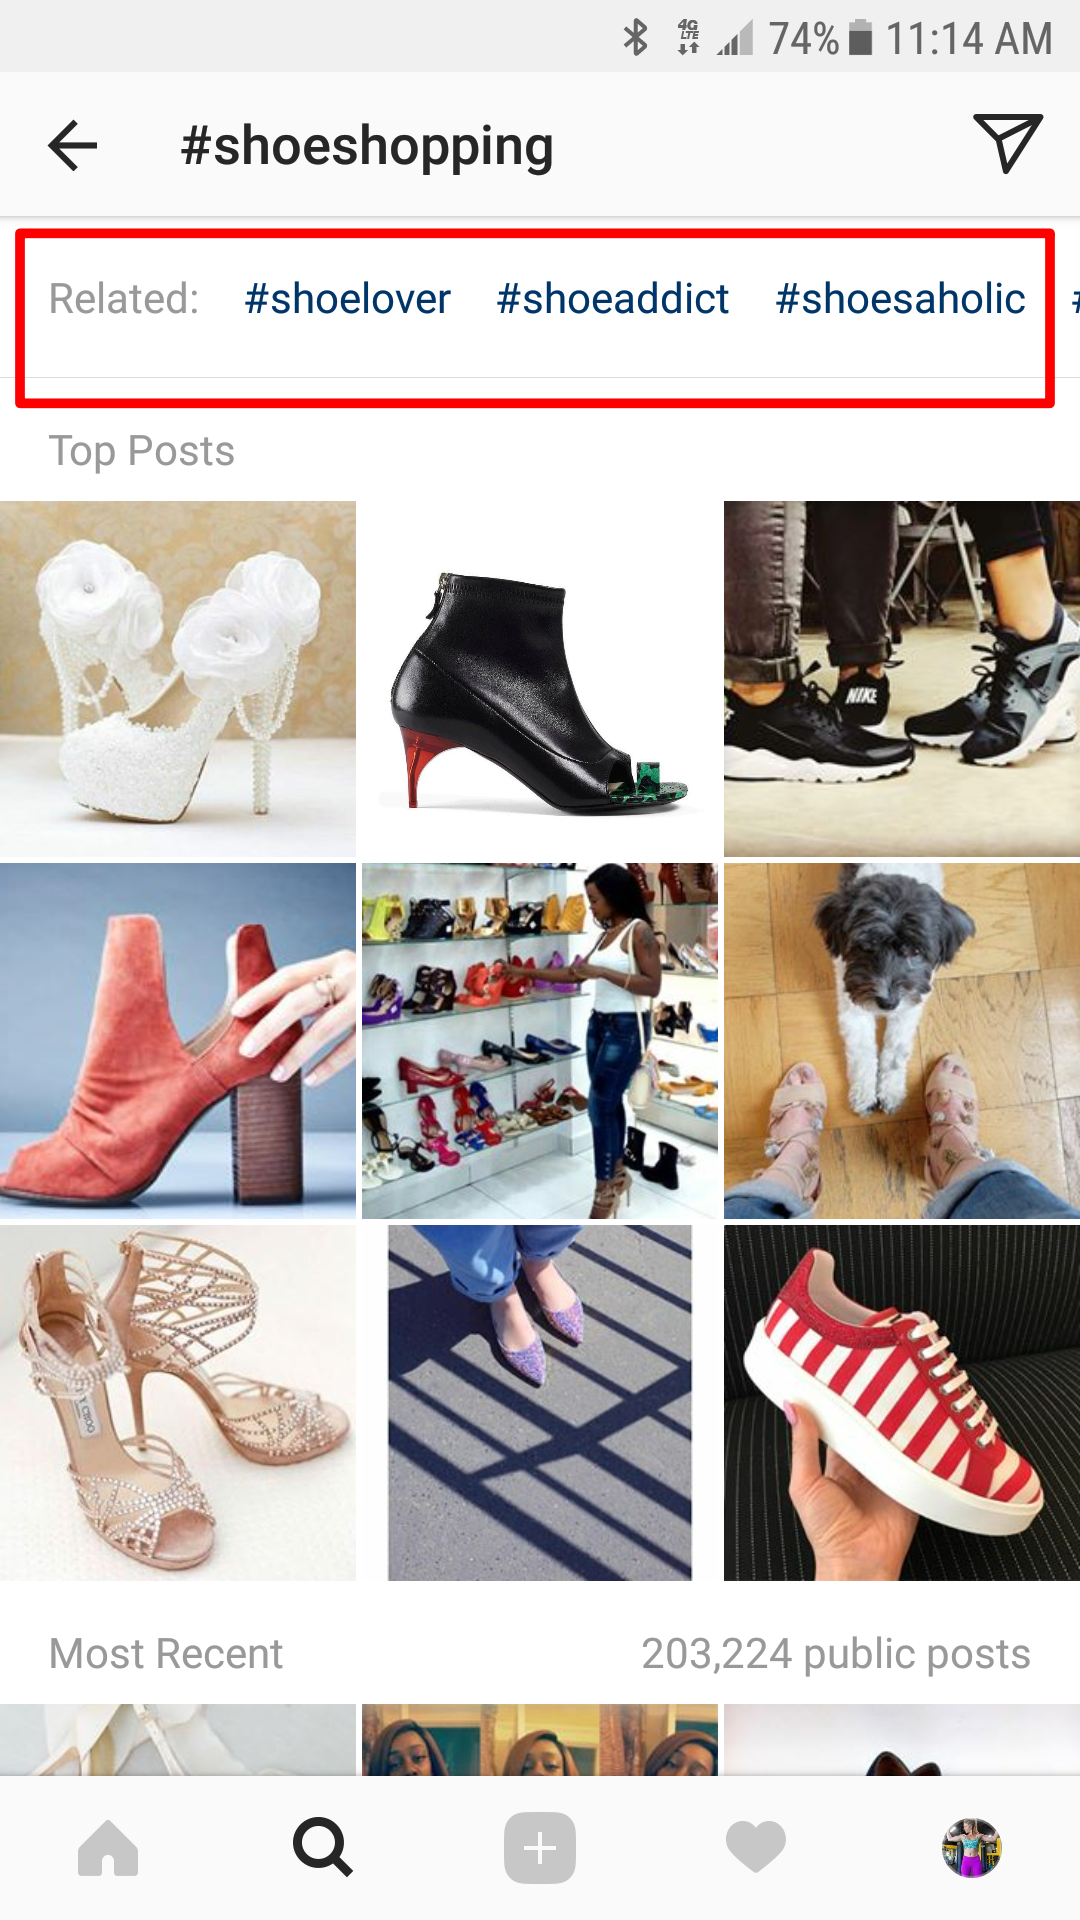 #shoeshopping Instagram for business hashtag example